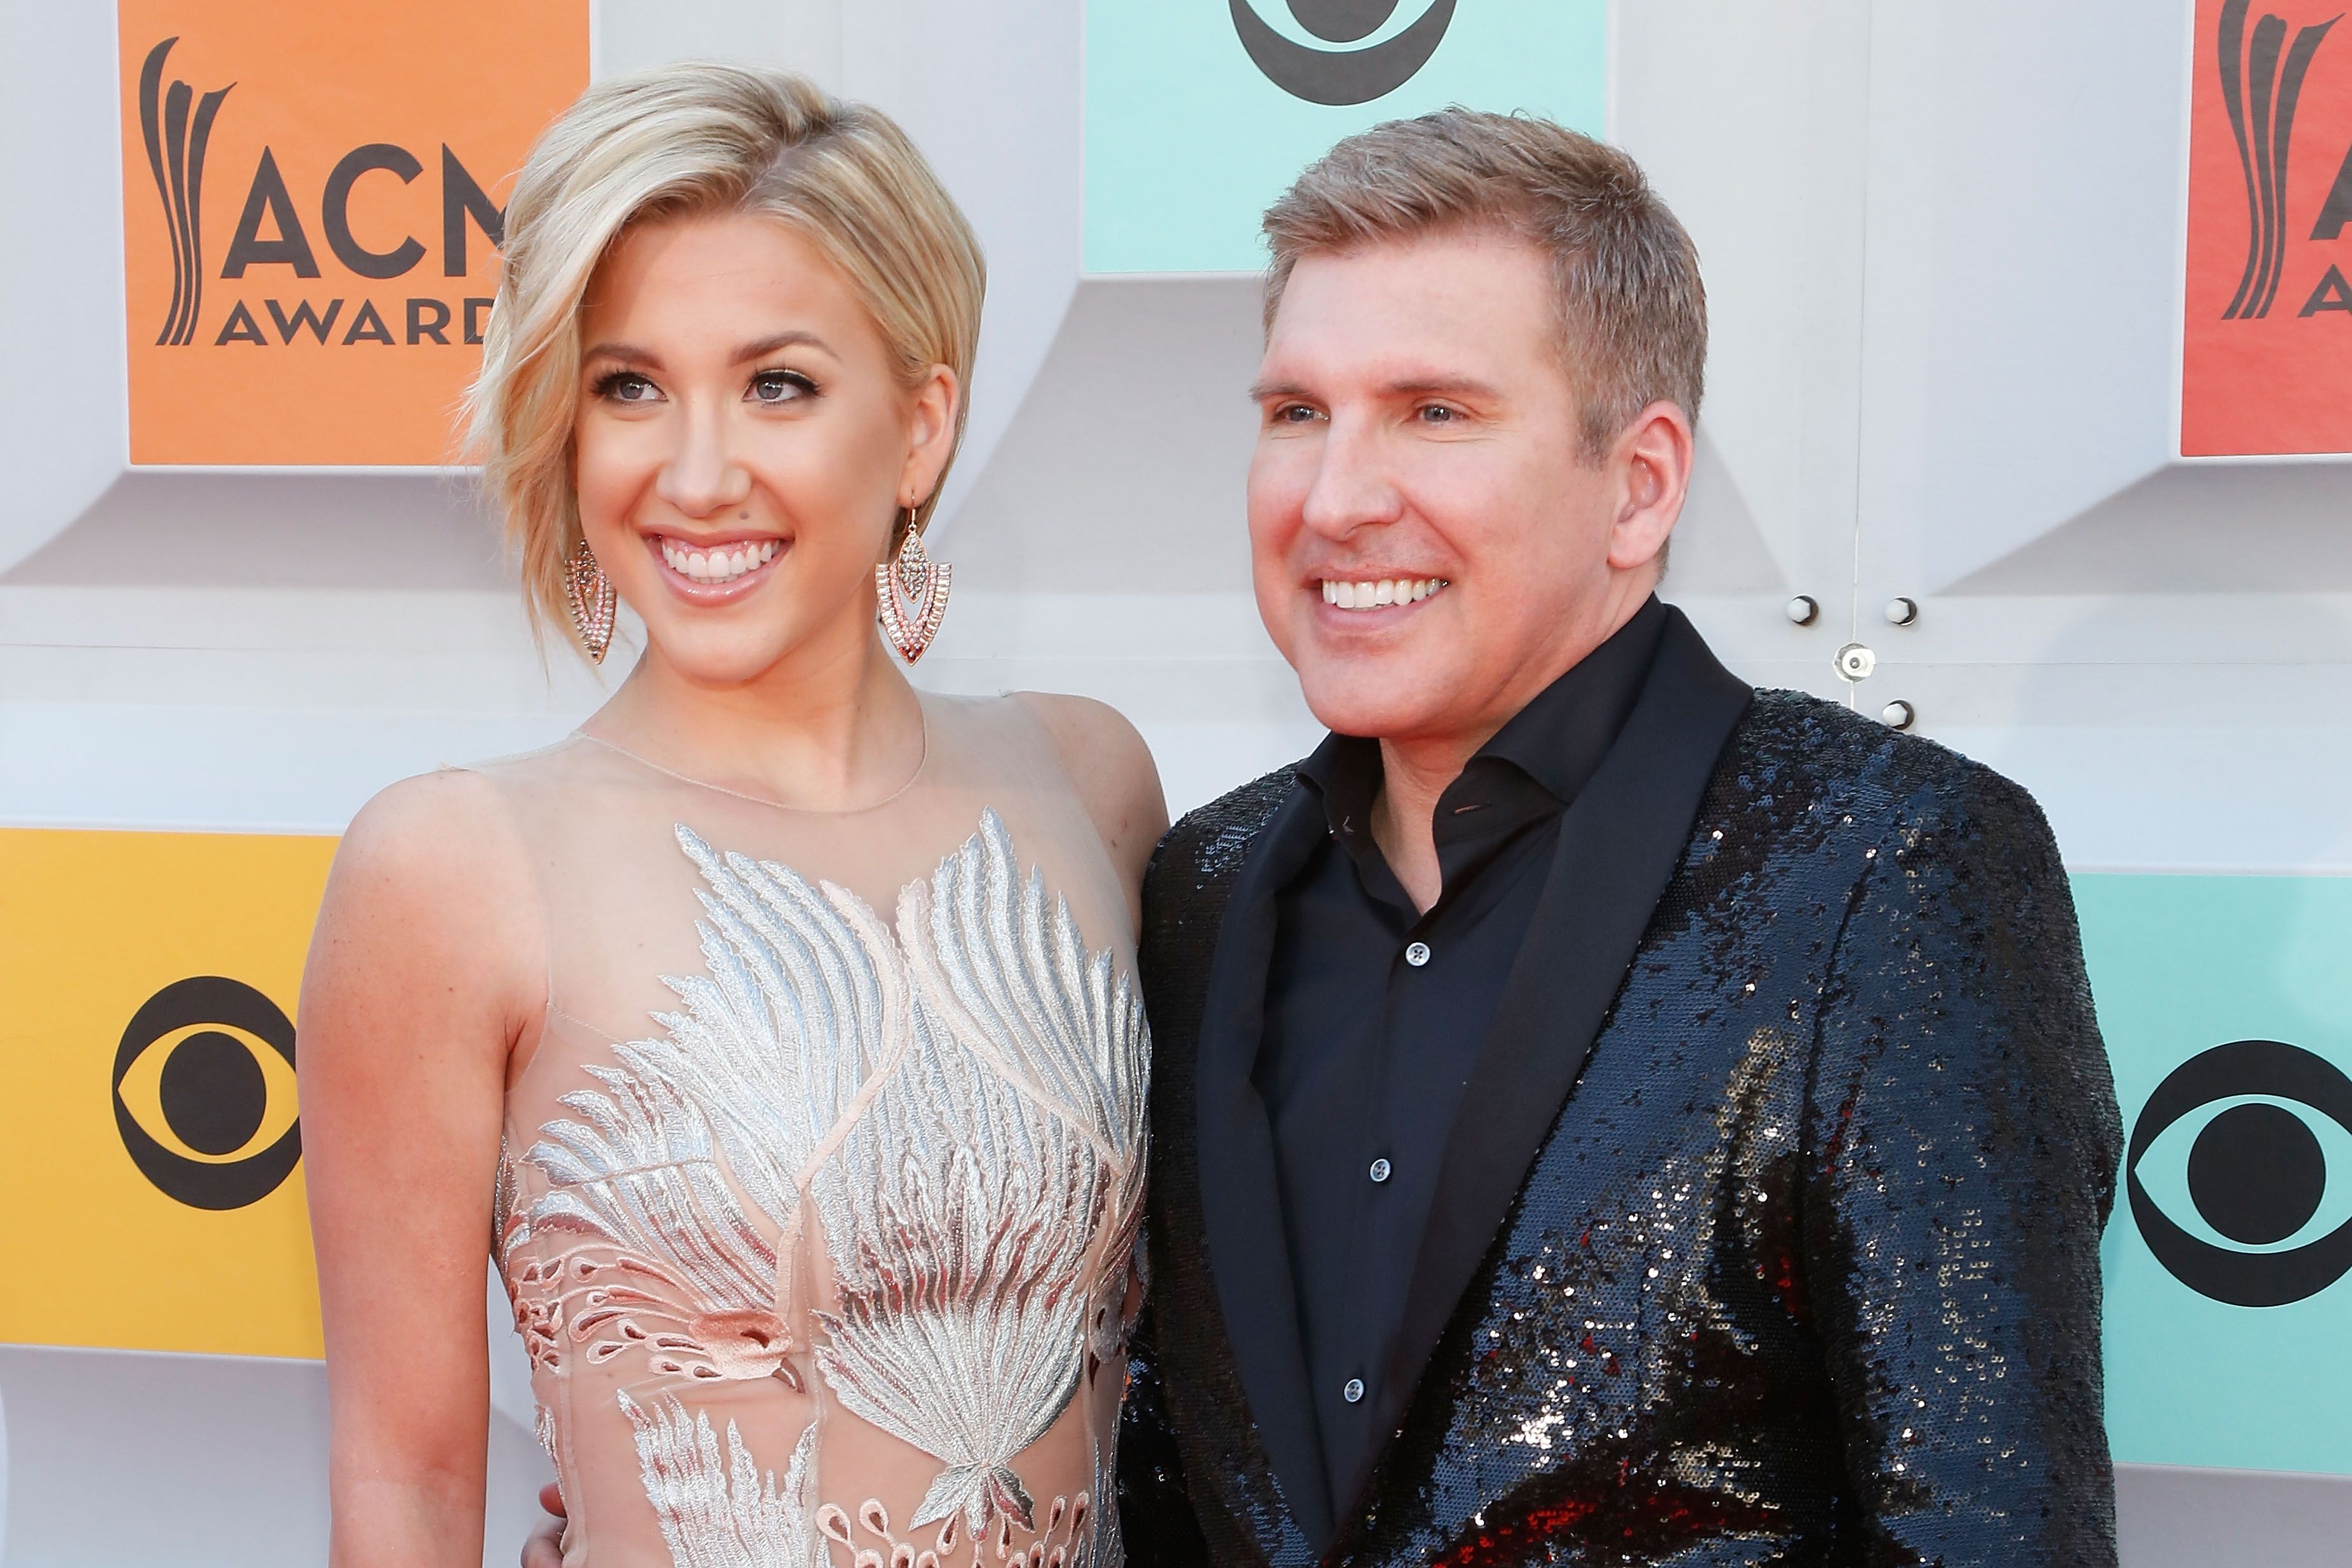 Savannah Chrisley and Todd Chrisley at the 51st Academy of Country Music Awards at MGM Grand Garden Arena on April 3, 2016 in Las Vegas, Nevada | Photo: Getty Images